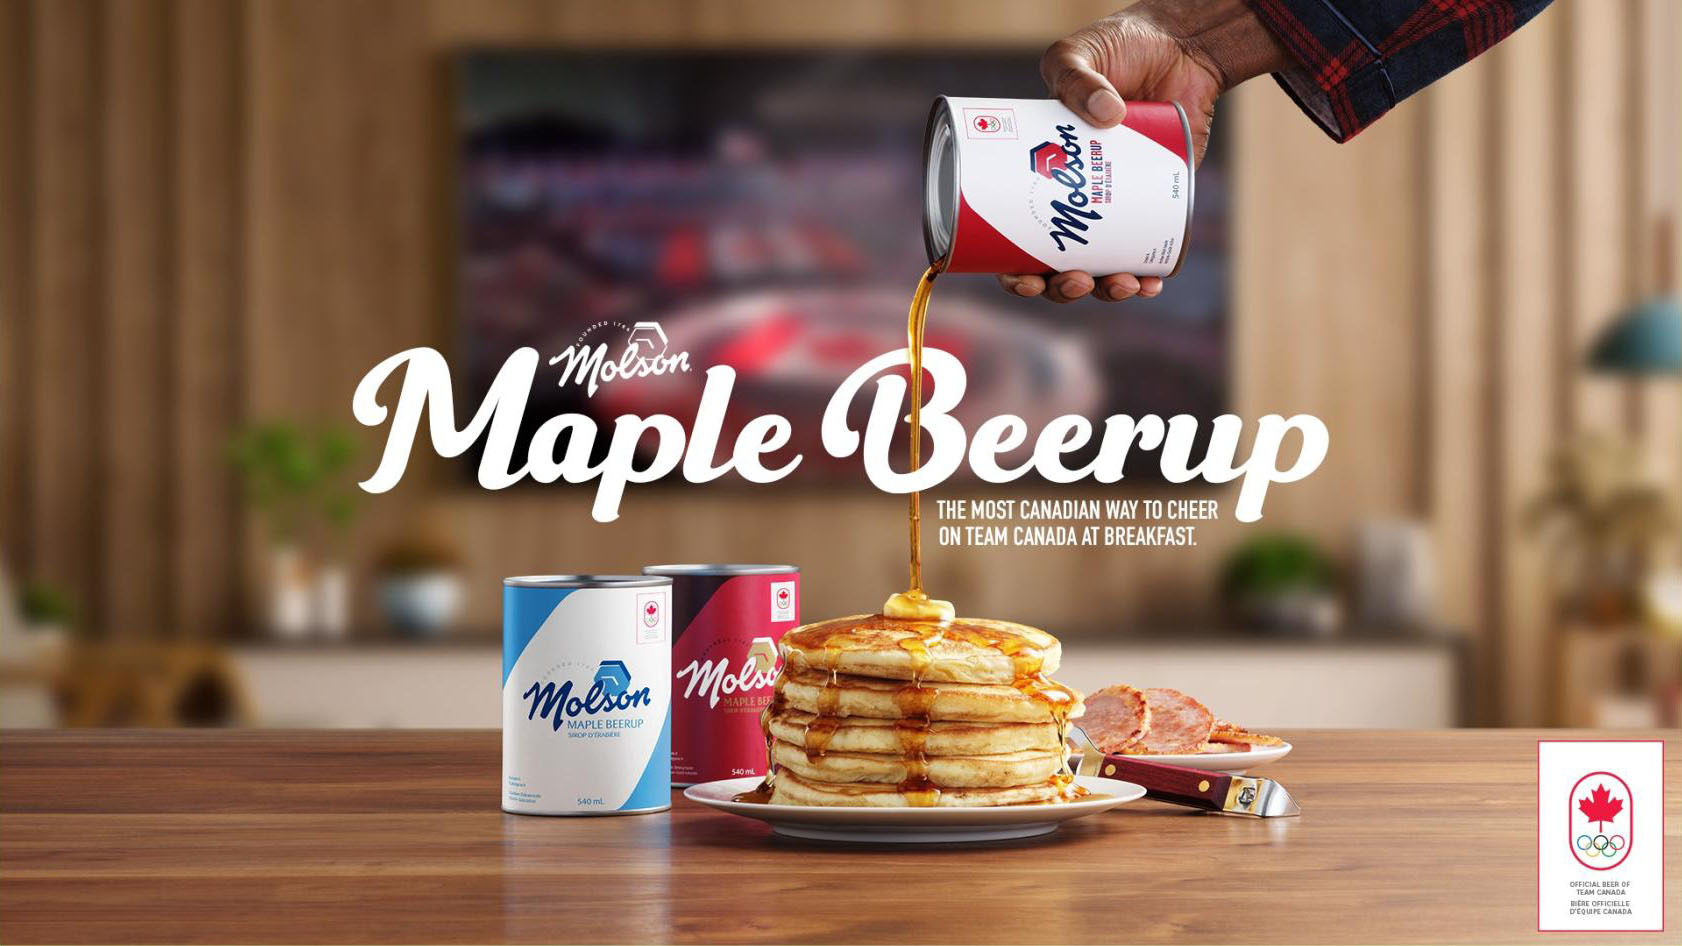 A Pretty Sweet Contest Molson Maple Beerup